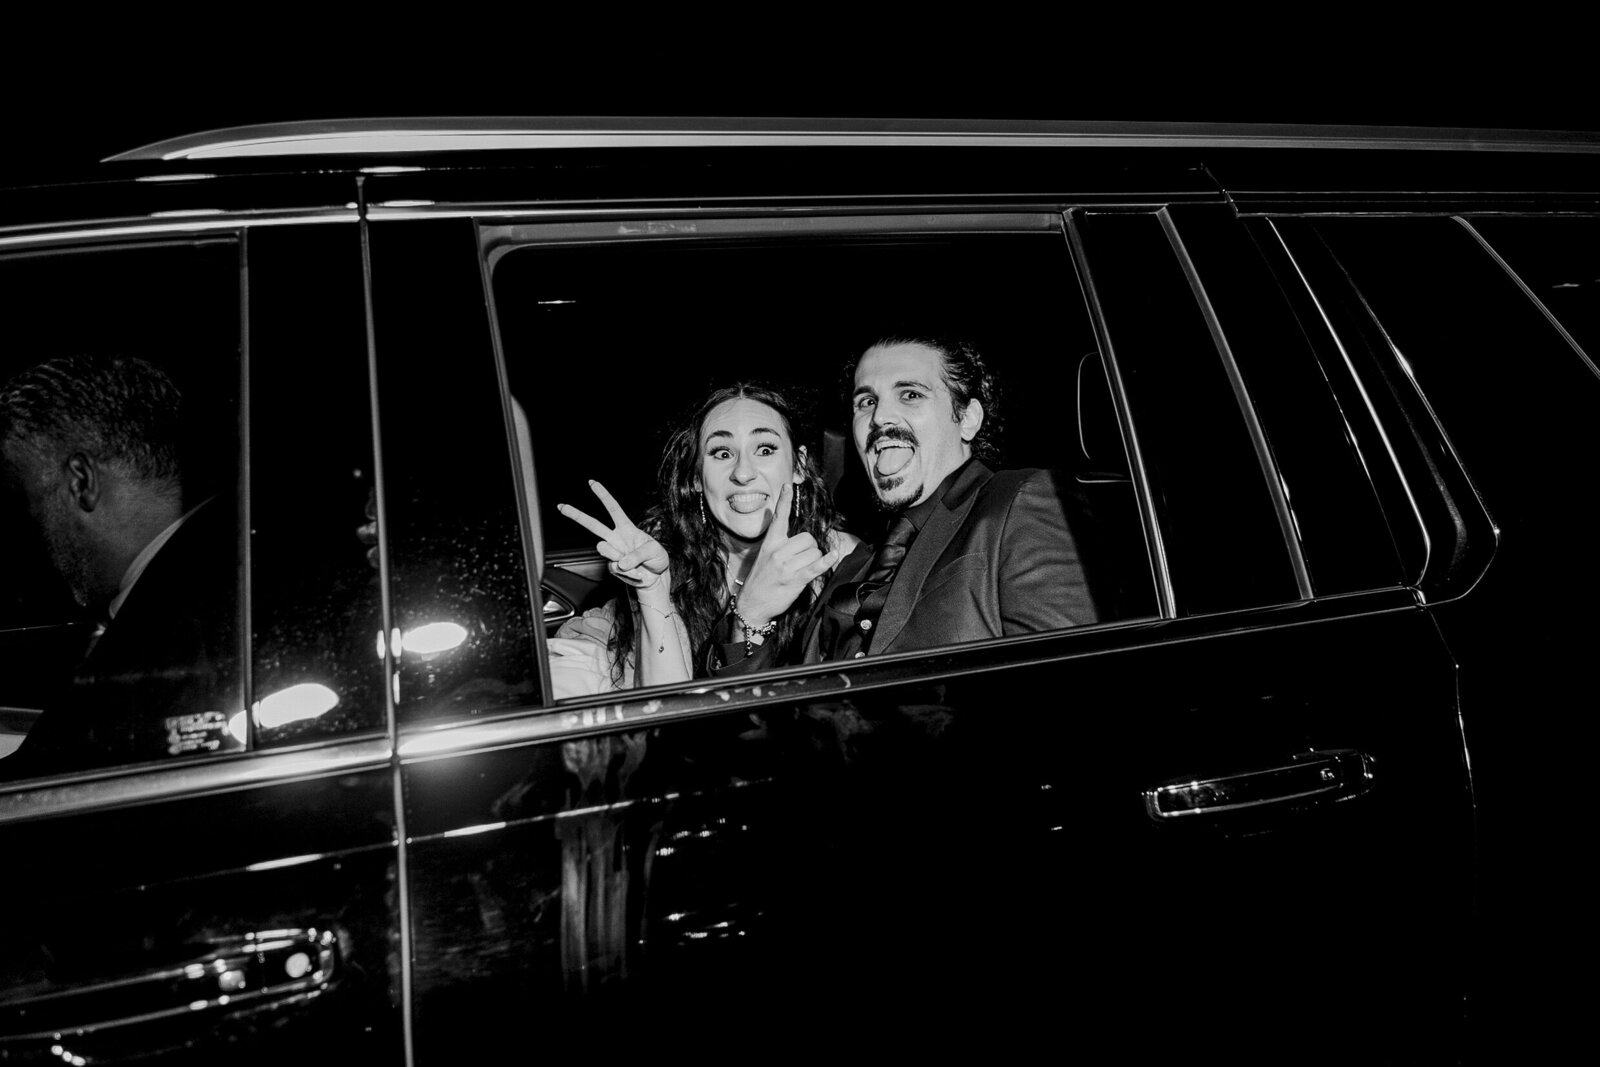 A black and white candid photo of a bride and groom playfully saying goodbye to their guests in their exit car after their wedding reception at The Lodge at The Springs in Denton, Texas. The bride and is on the left and is holding up a peace sign with one hand and has a large surprised, playful smile. The groom is on the right and is holding up the rock and roll hand sign and is sticking his tongue out. A drive can be seen in the front seat of the car.